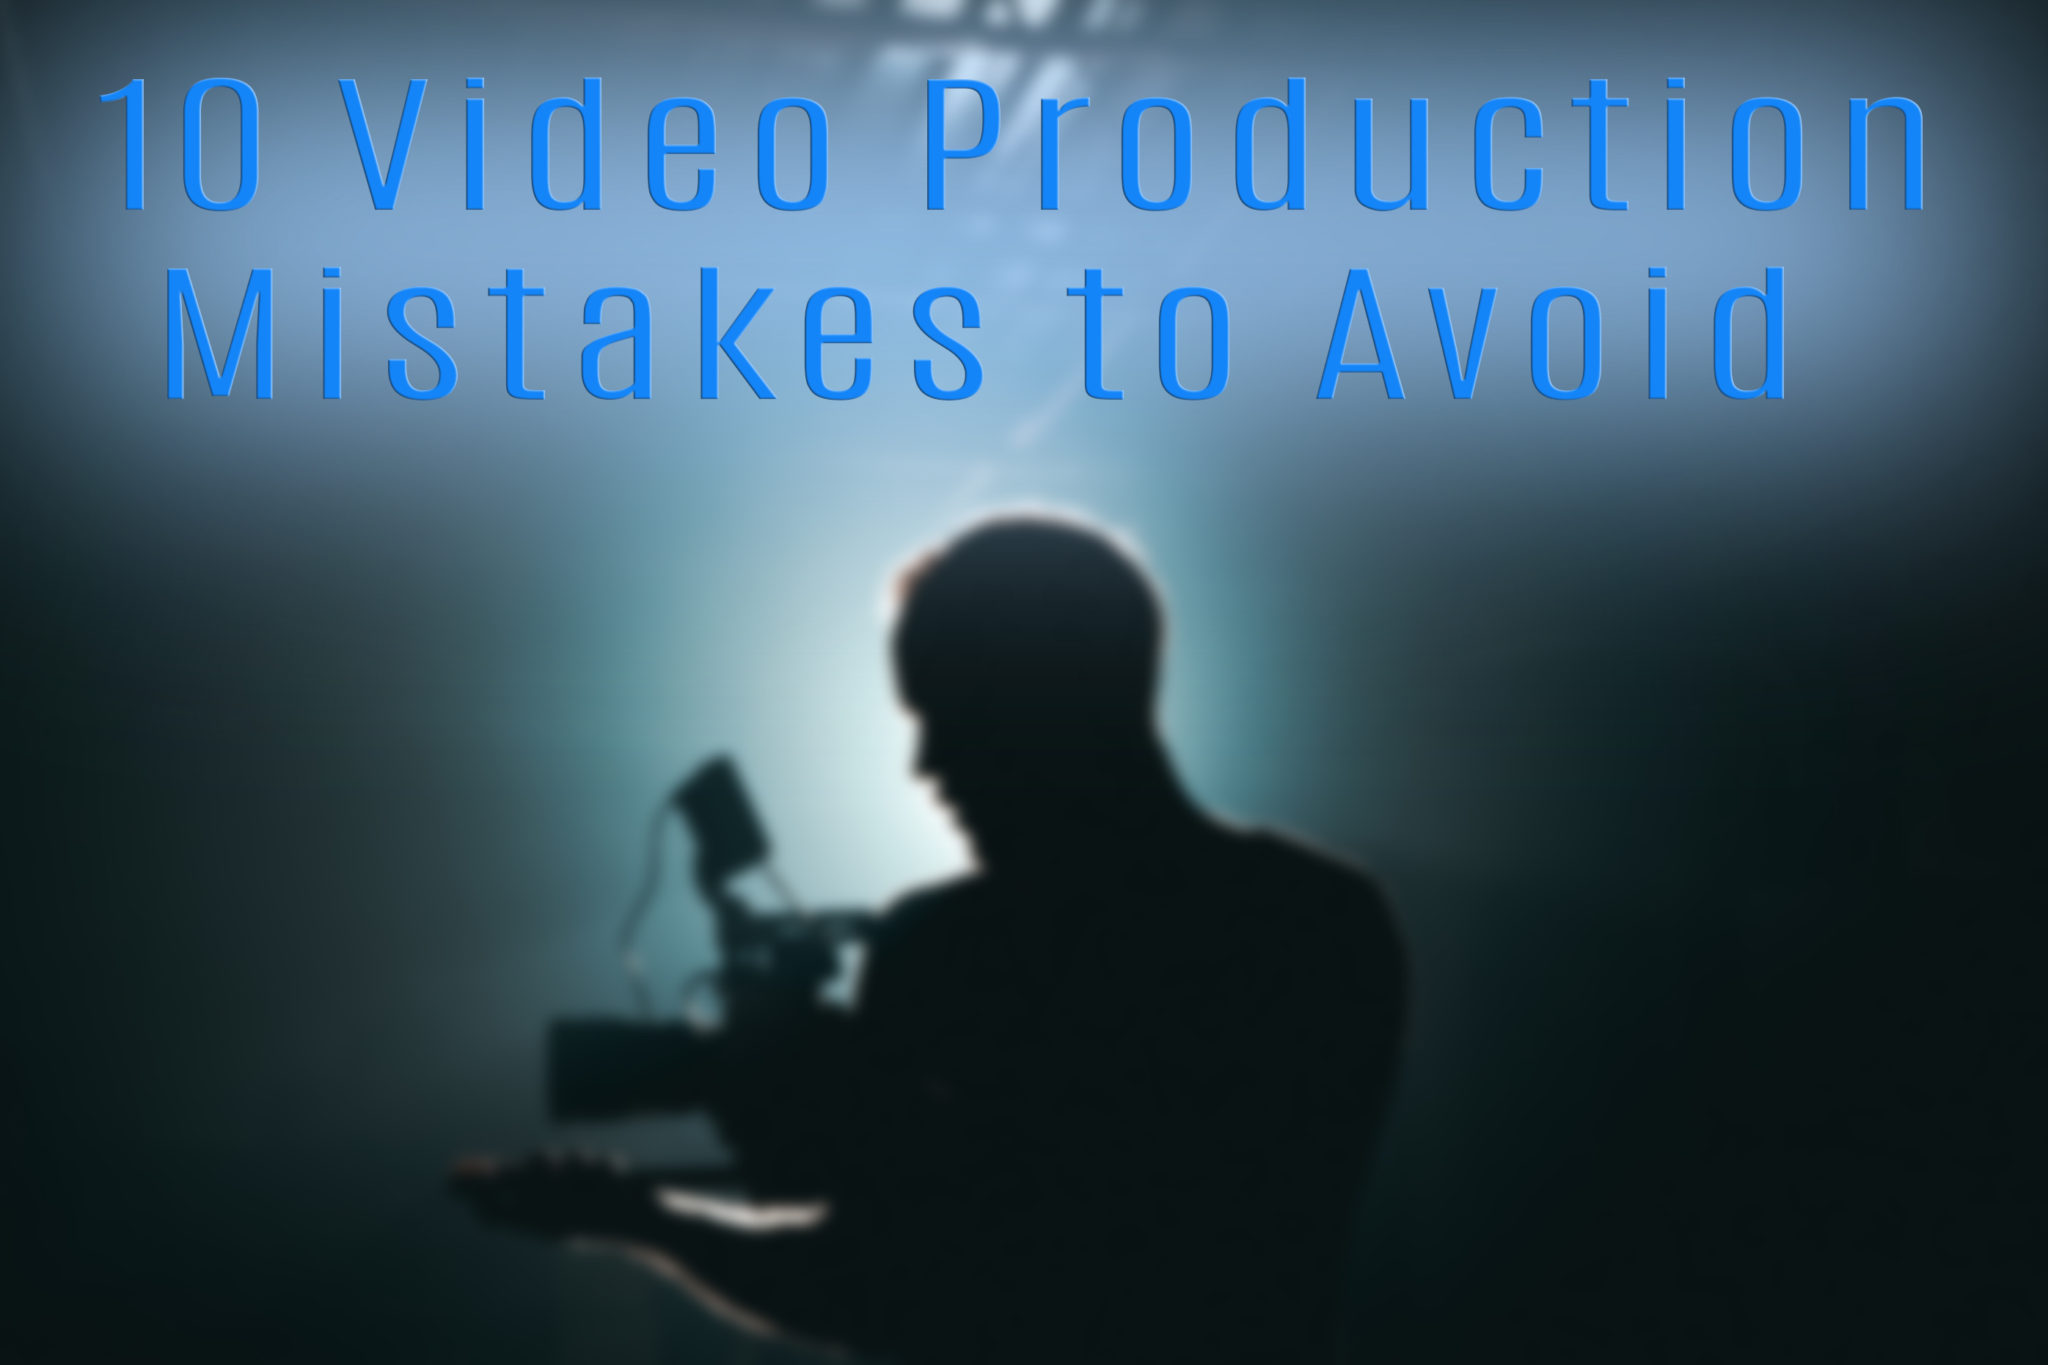 10 video production mistakes to avoid